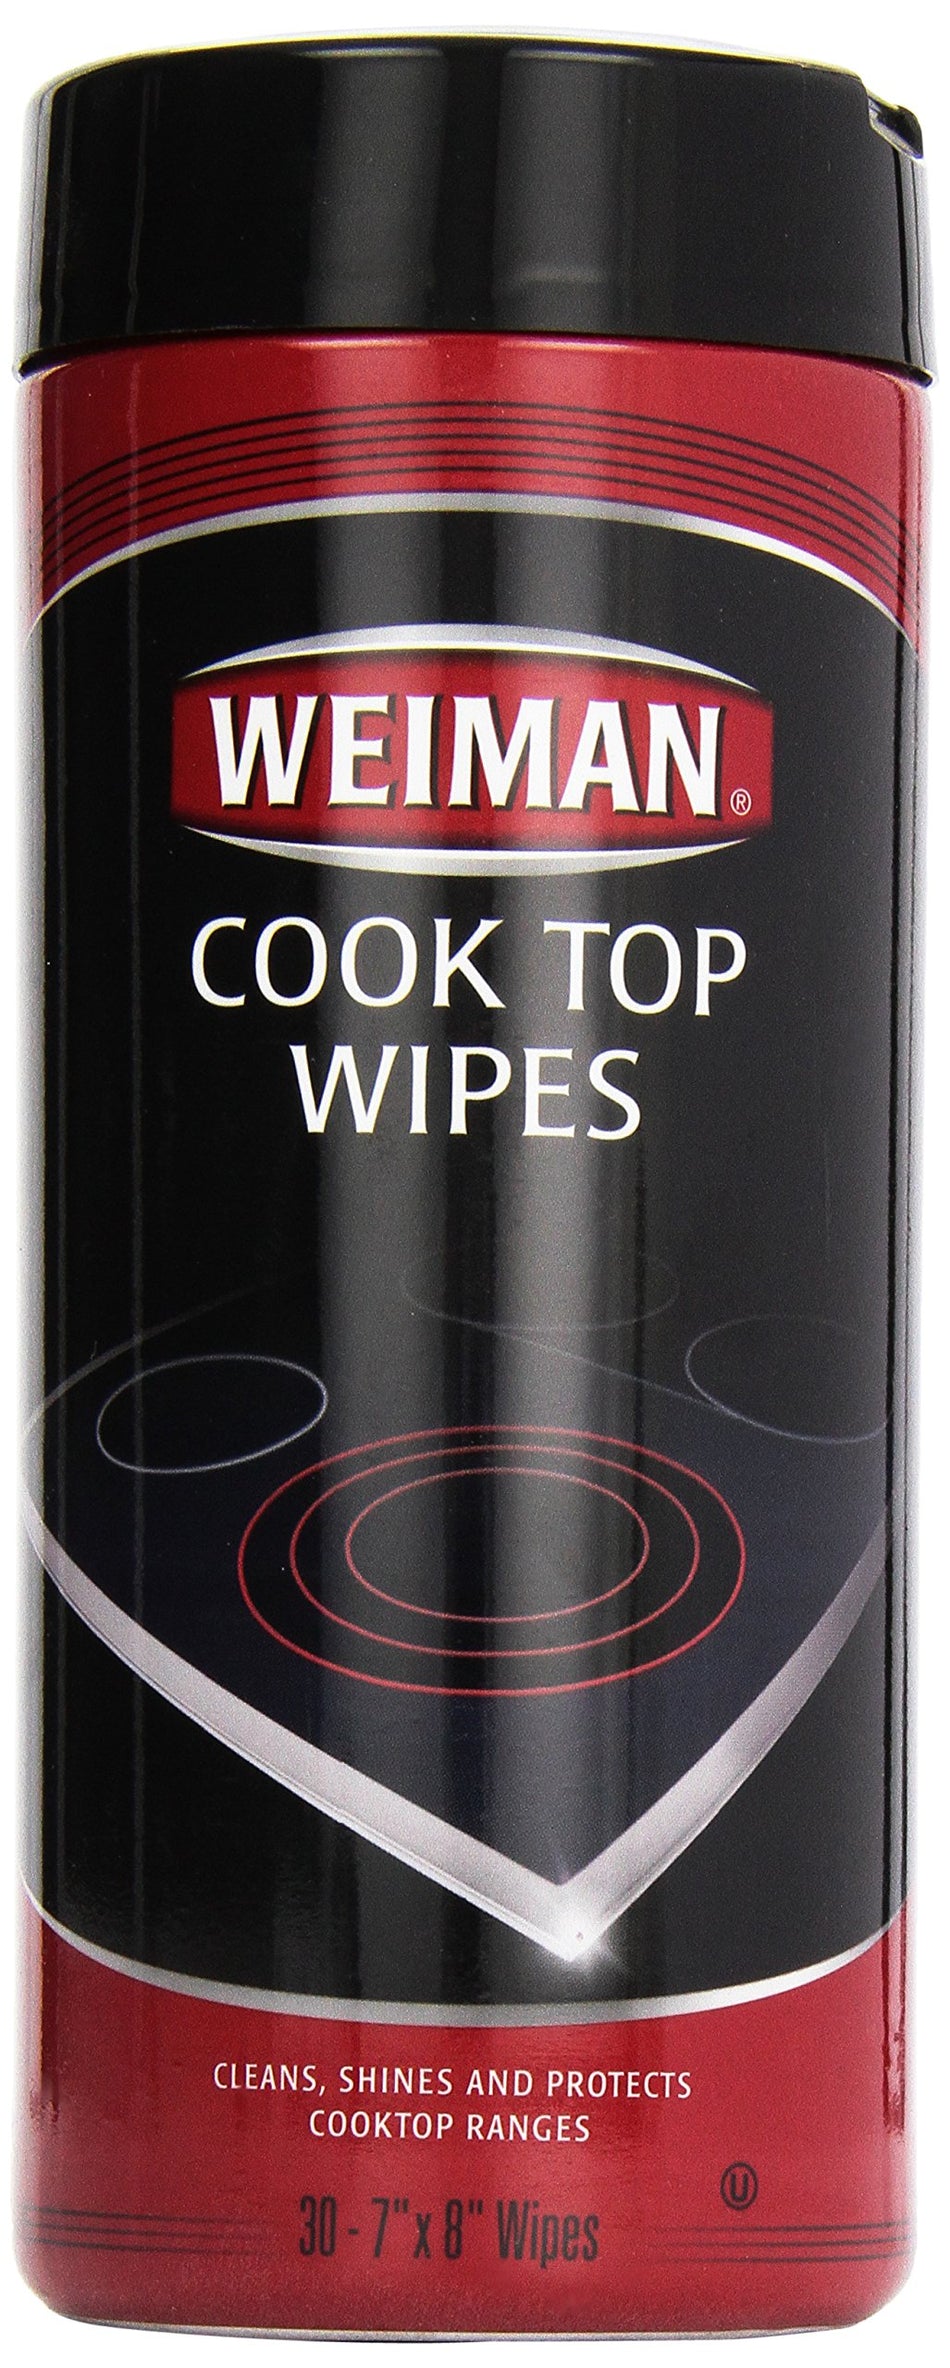 Weiman Microwave & Cook Top Wipes [30 Wipes]